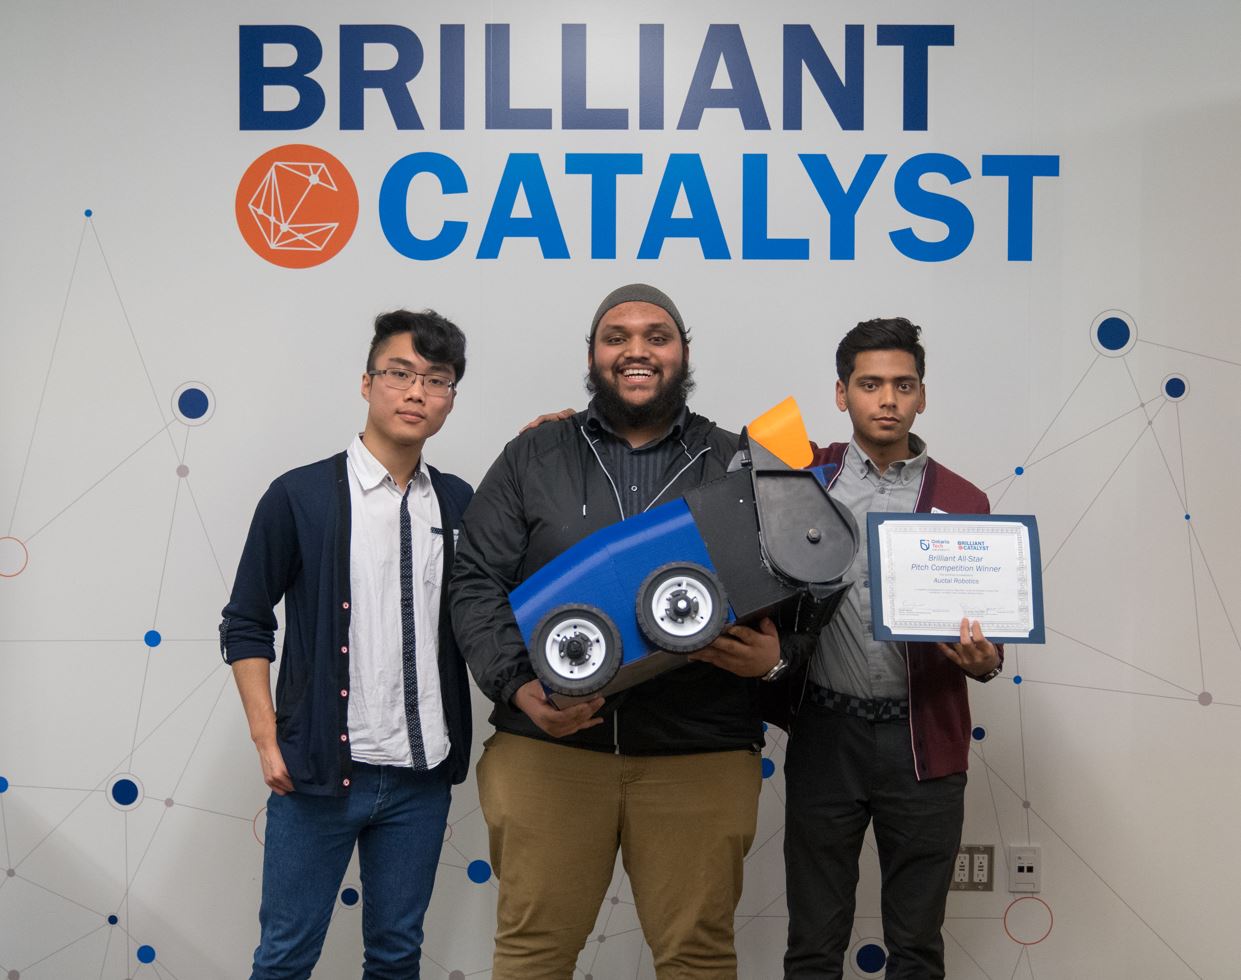 Winners of the 2019 Brilliant Catalyst Pitch Competition